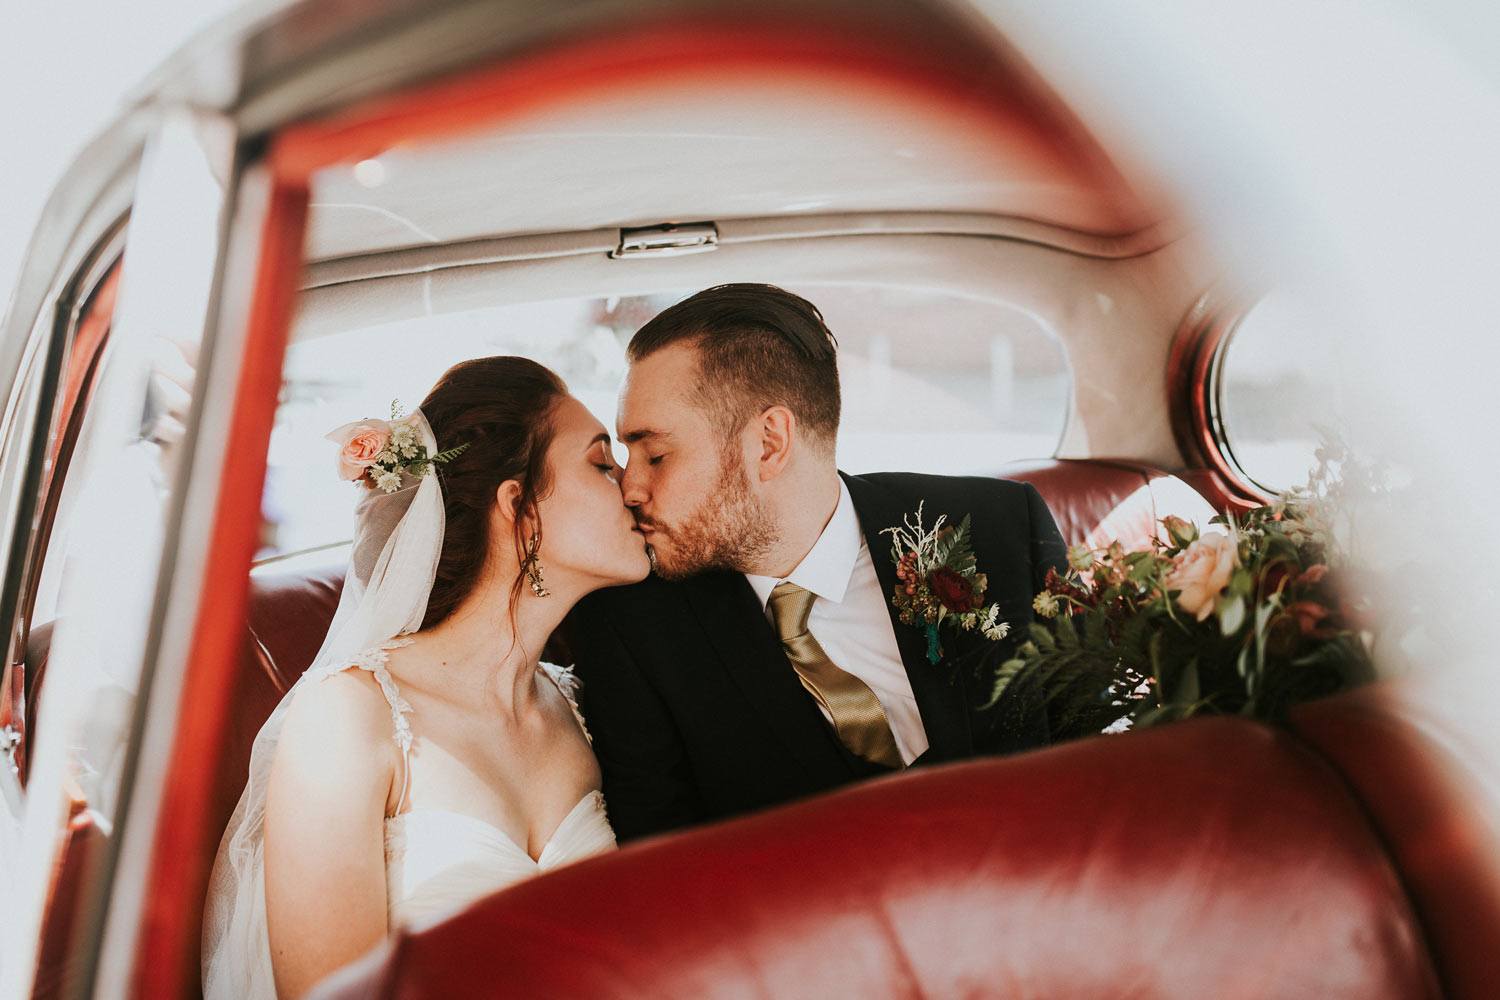 Couple kissing in wedding car with flowers